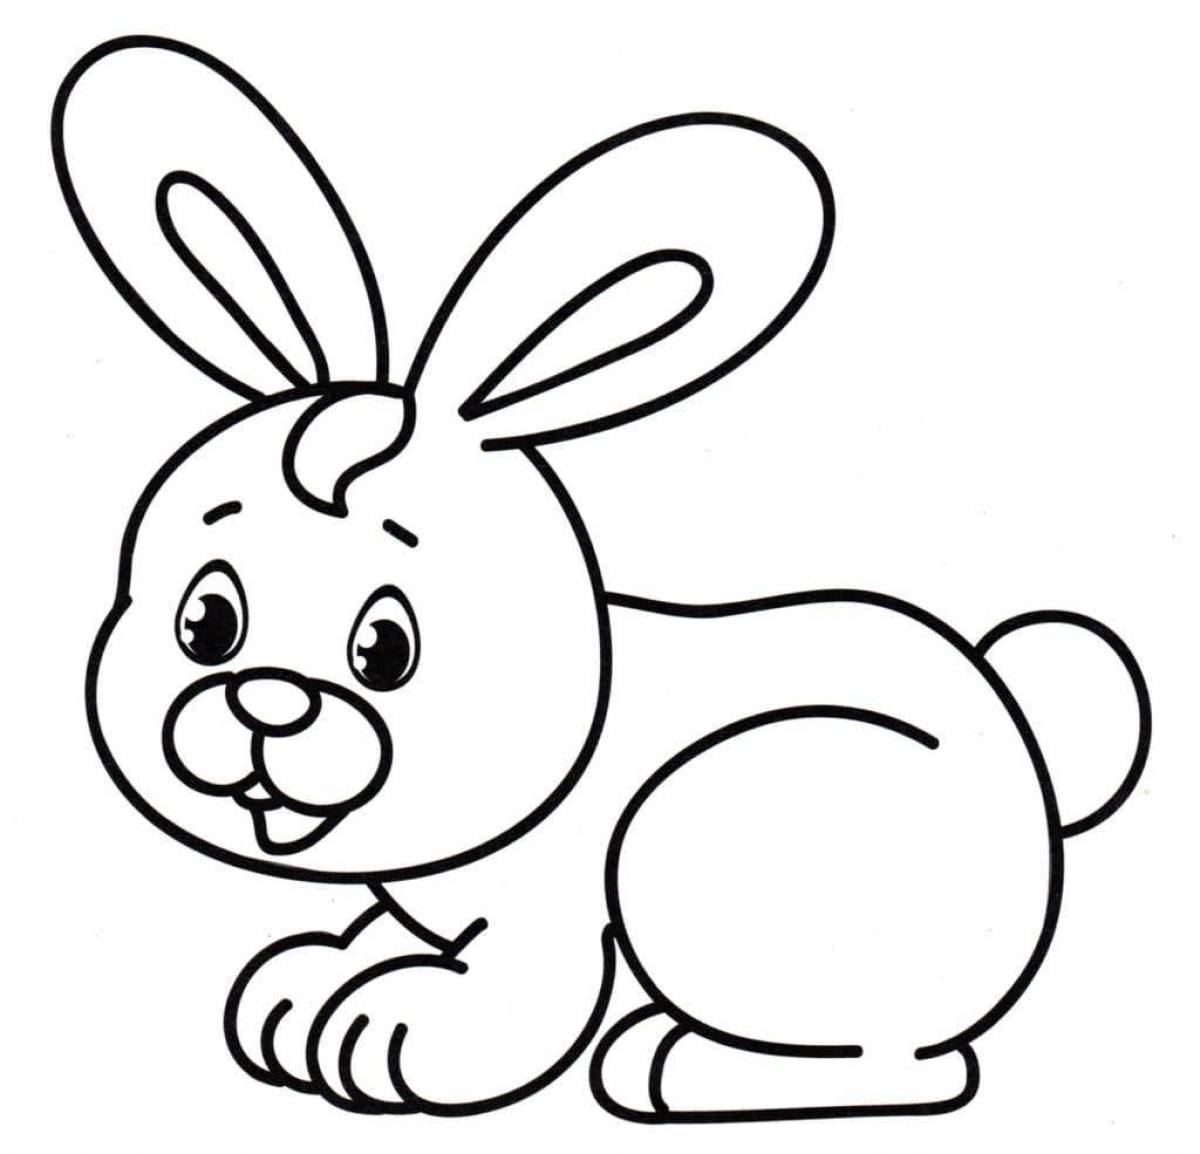 Fluffy bunny coloring book for kids